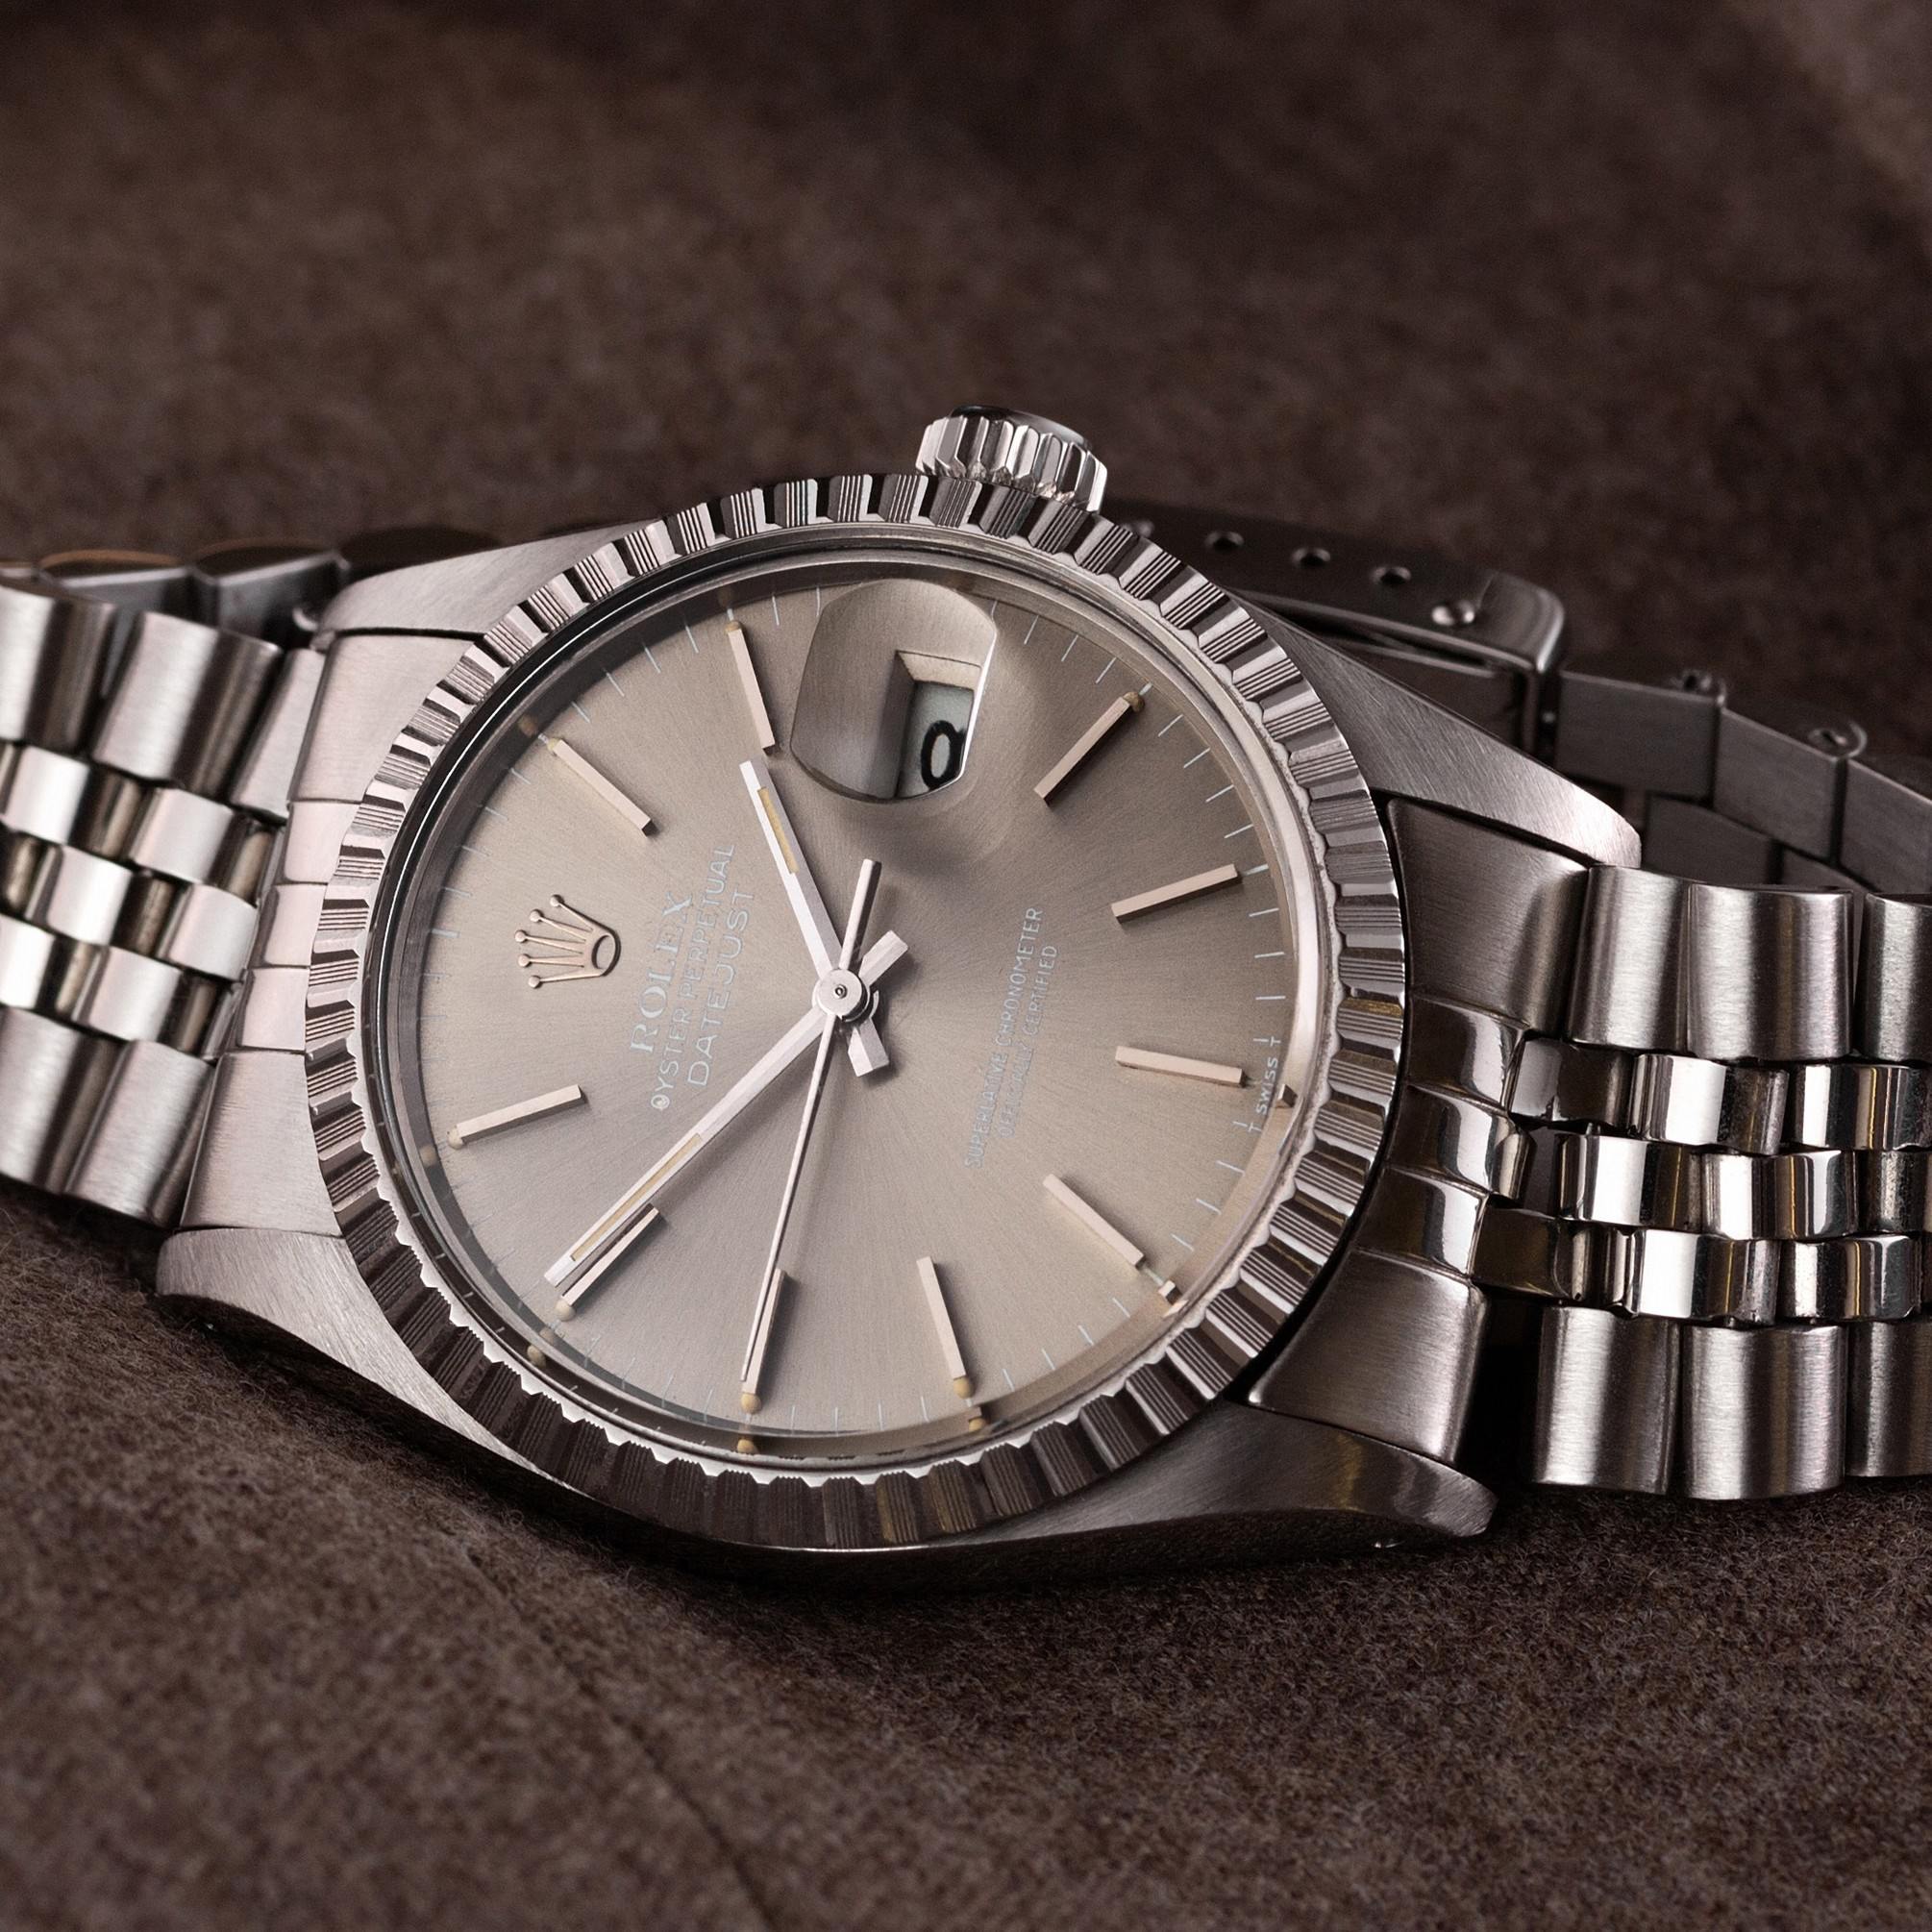 Rolex Datejust 16030 taupe dial - The Modest Man - crop